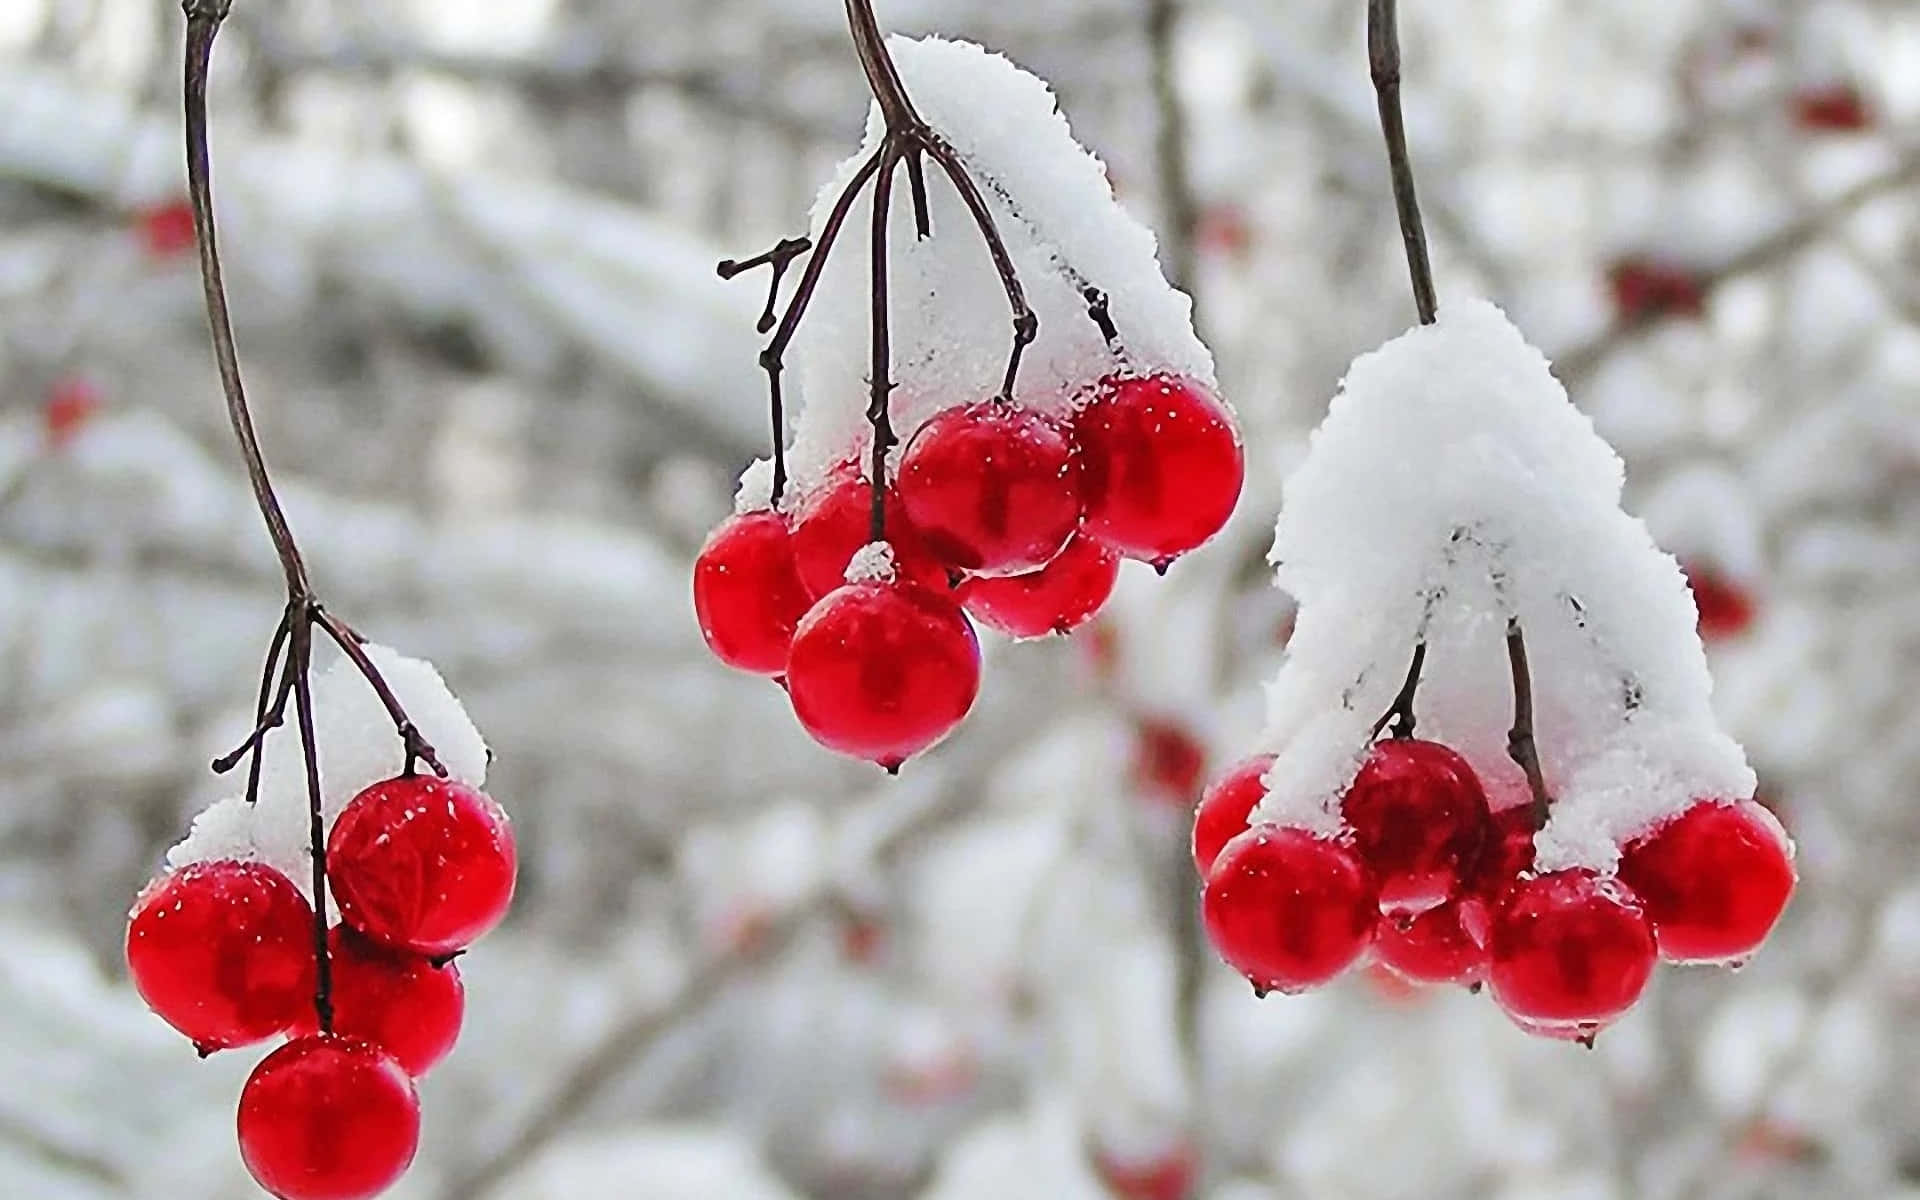 Winter Fruits Collection on Display Wallpaper